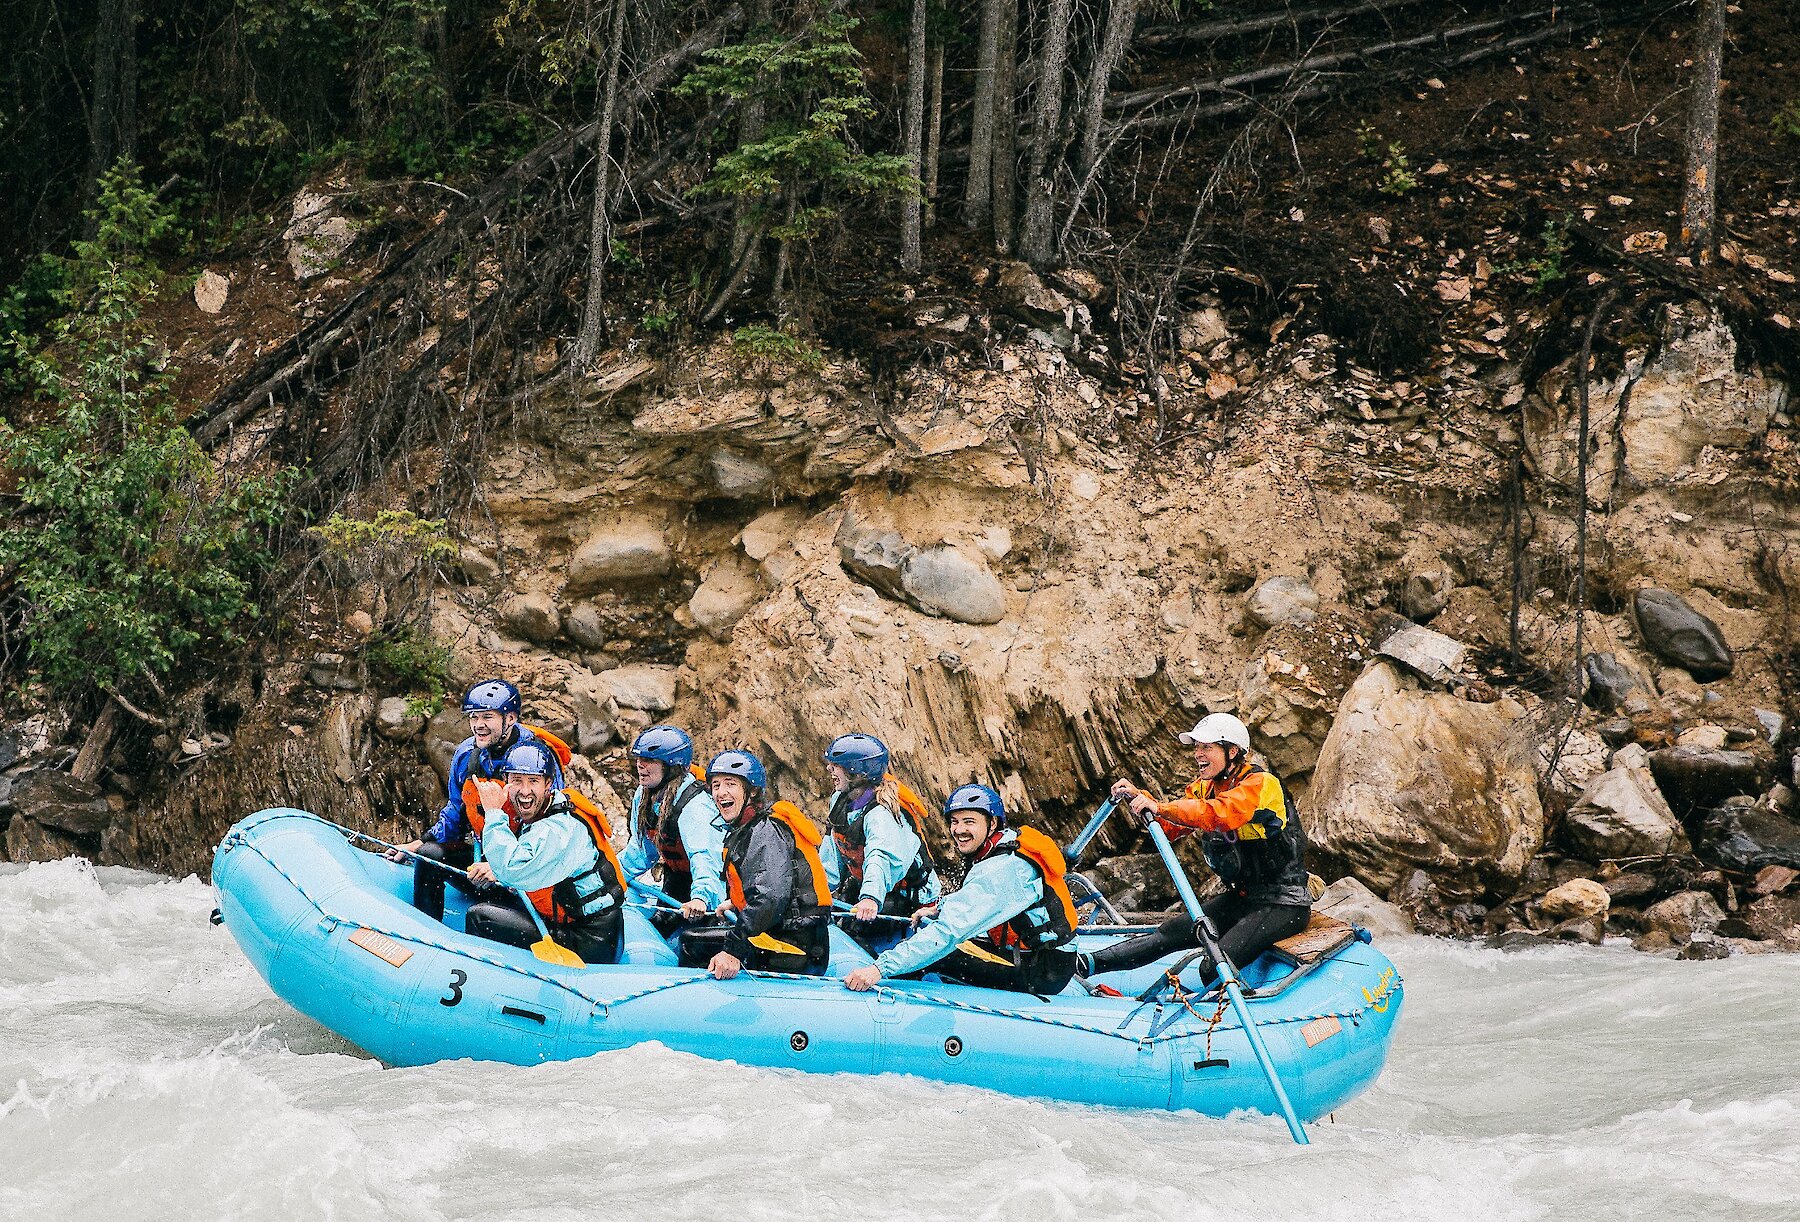 Rafting adventures on the Kicking Horse River